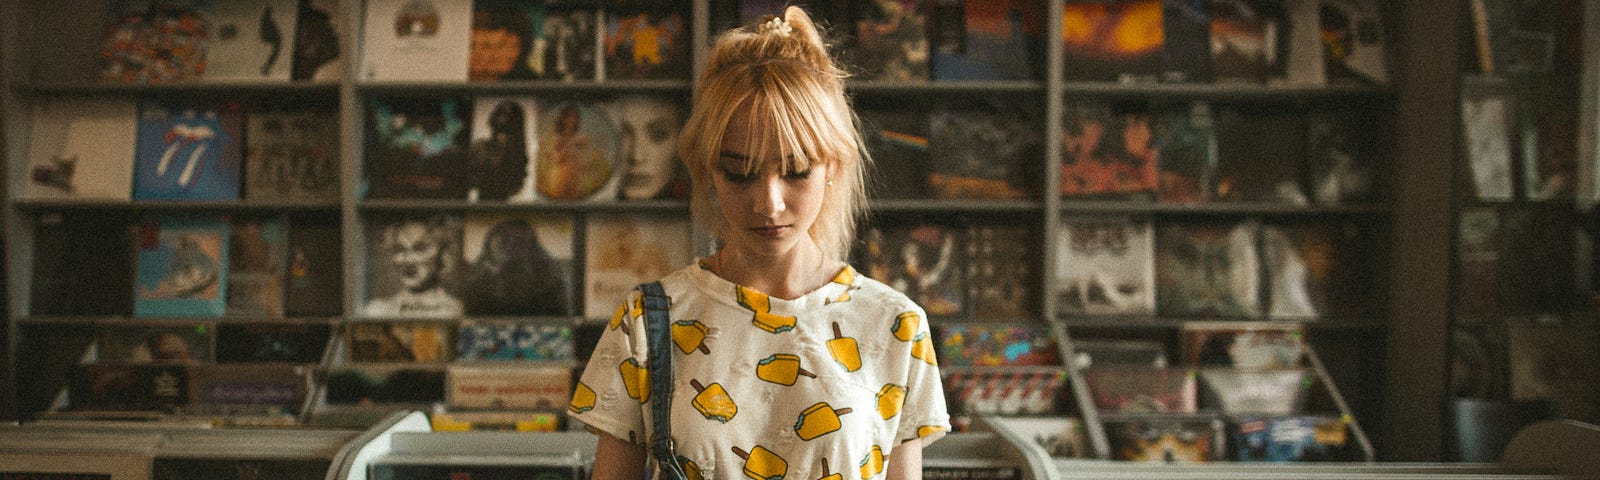 A young woman in a colourful T-shirt browses records in a vinyl record store